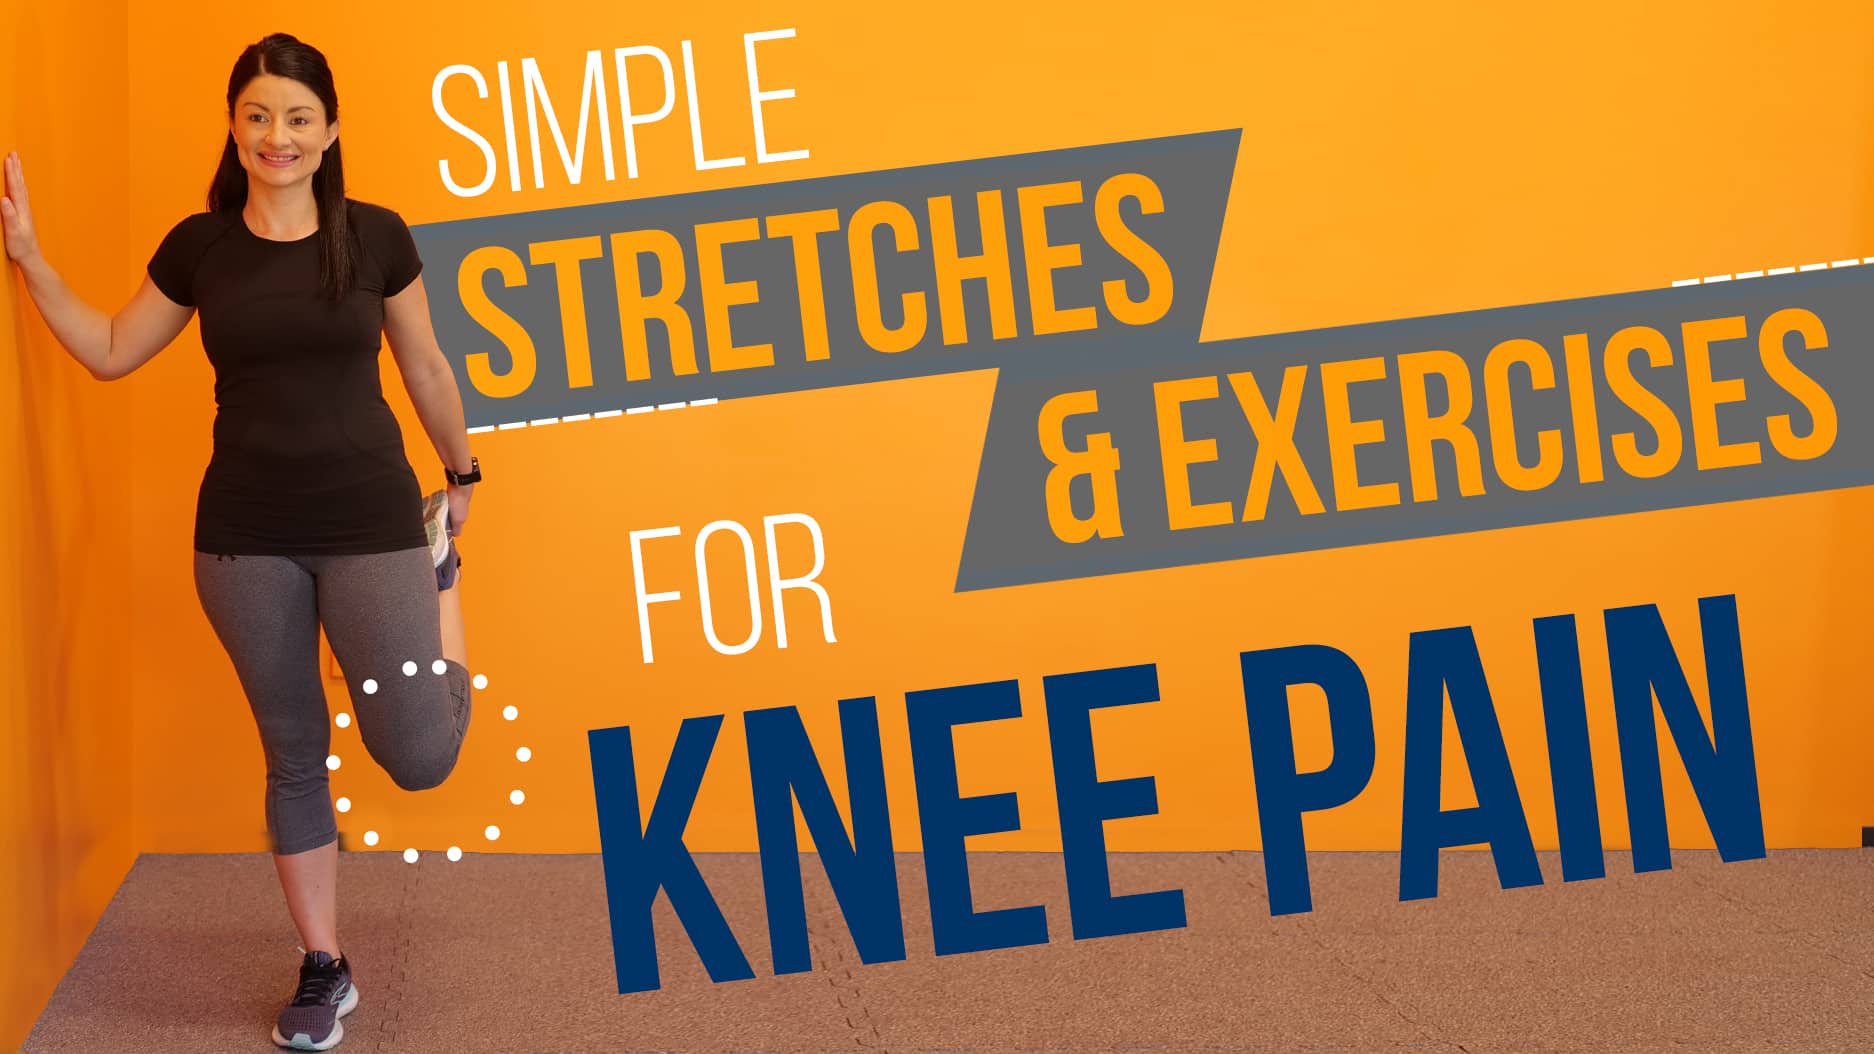 Exercises and Stretches to Relieve Knee Pain | Airrosti